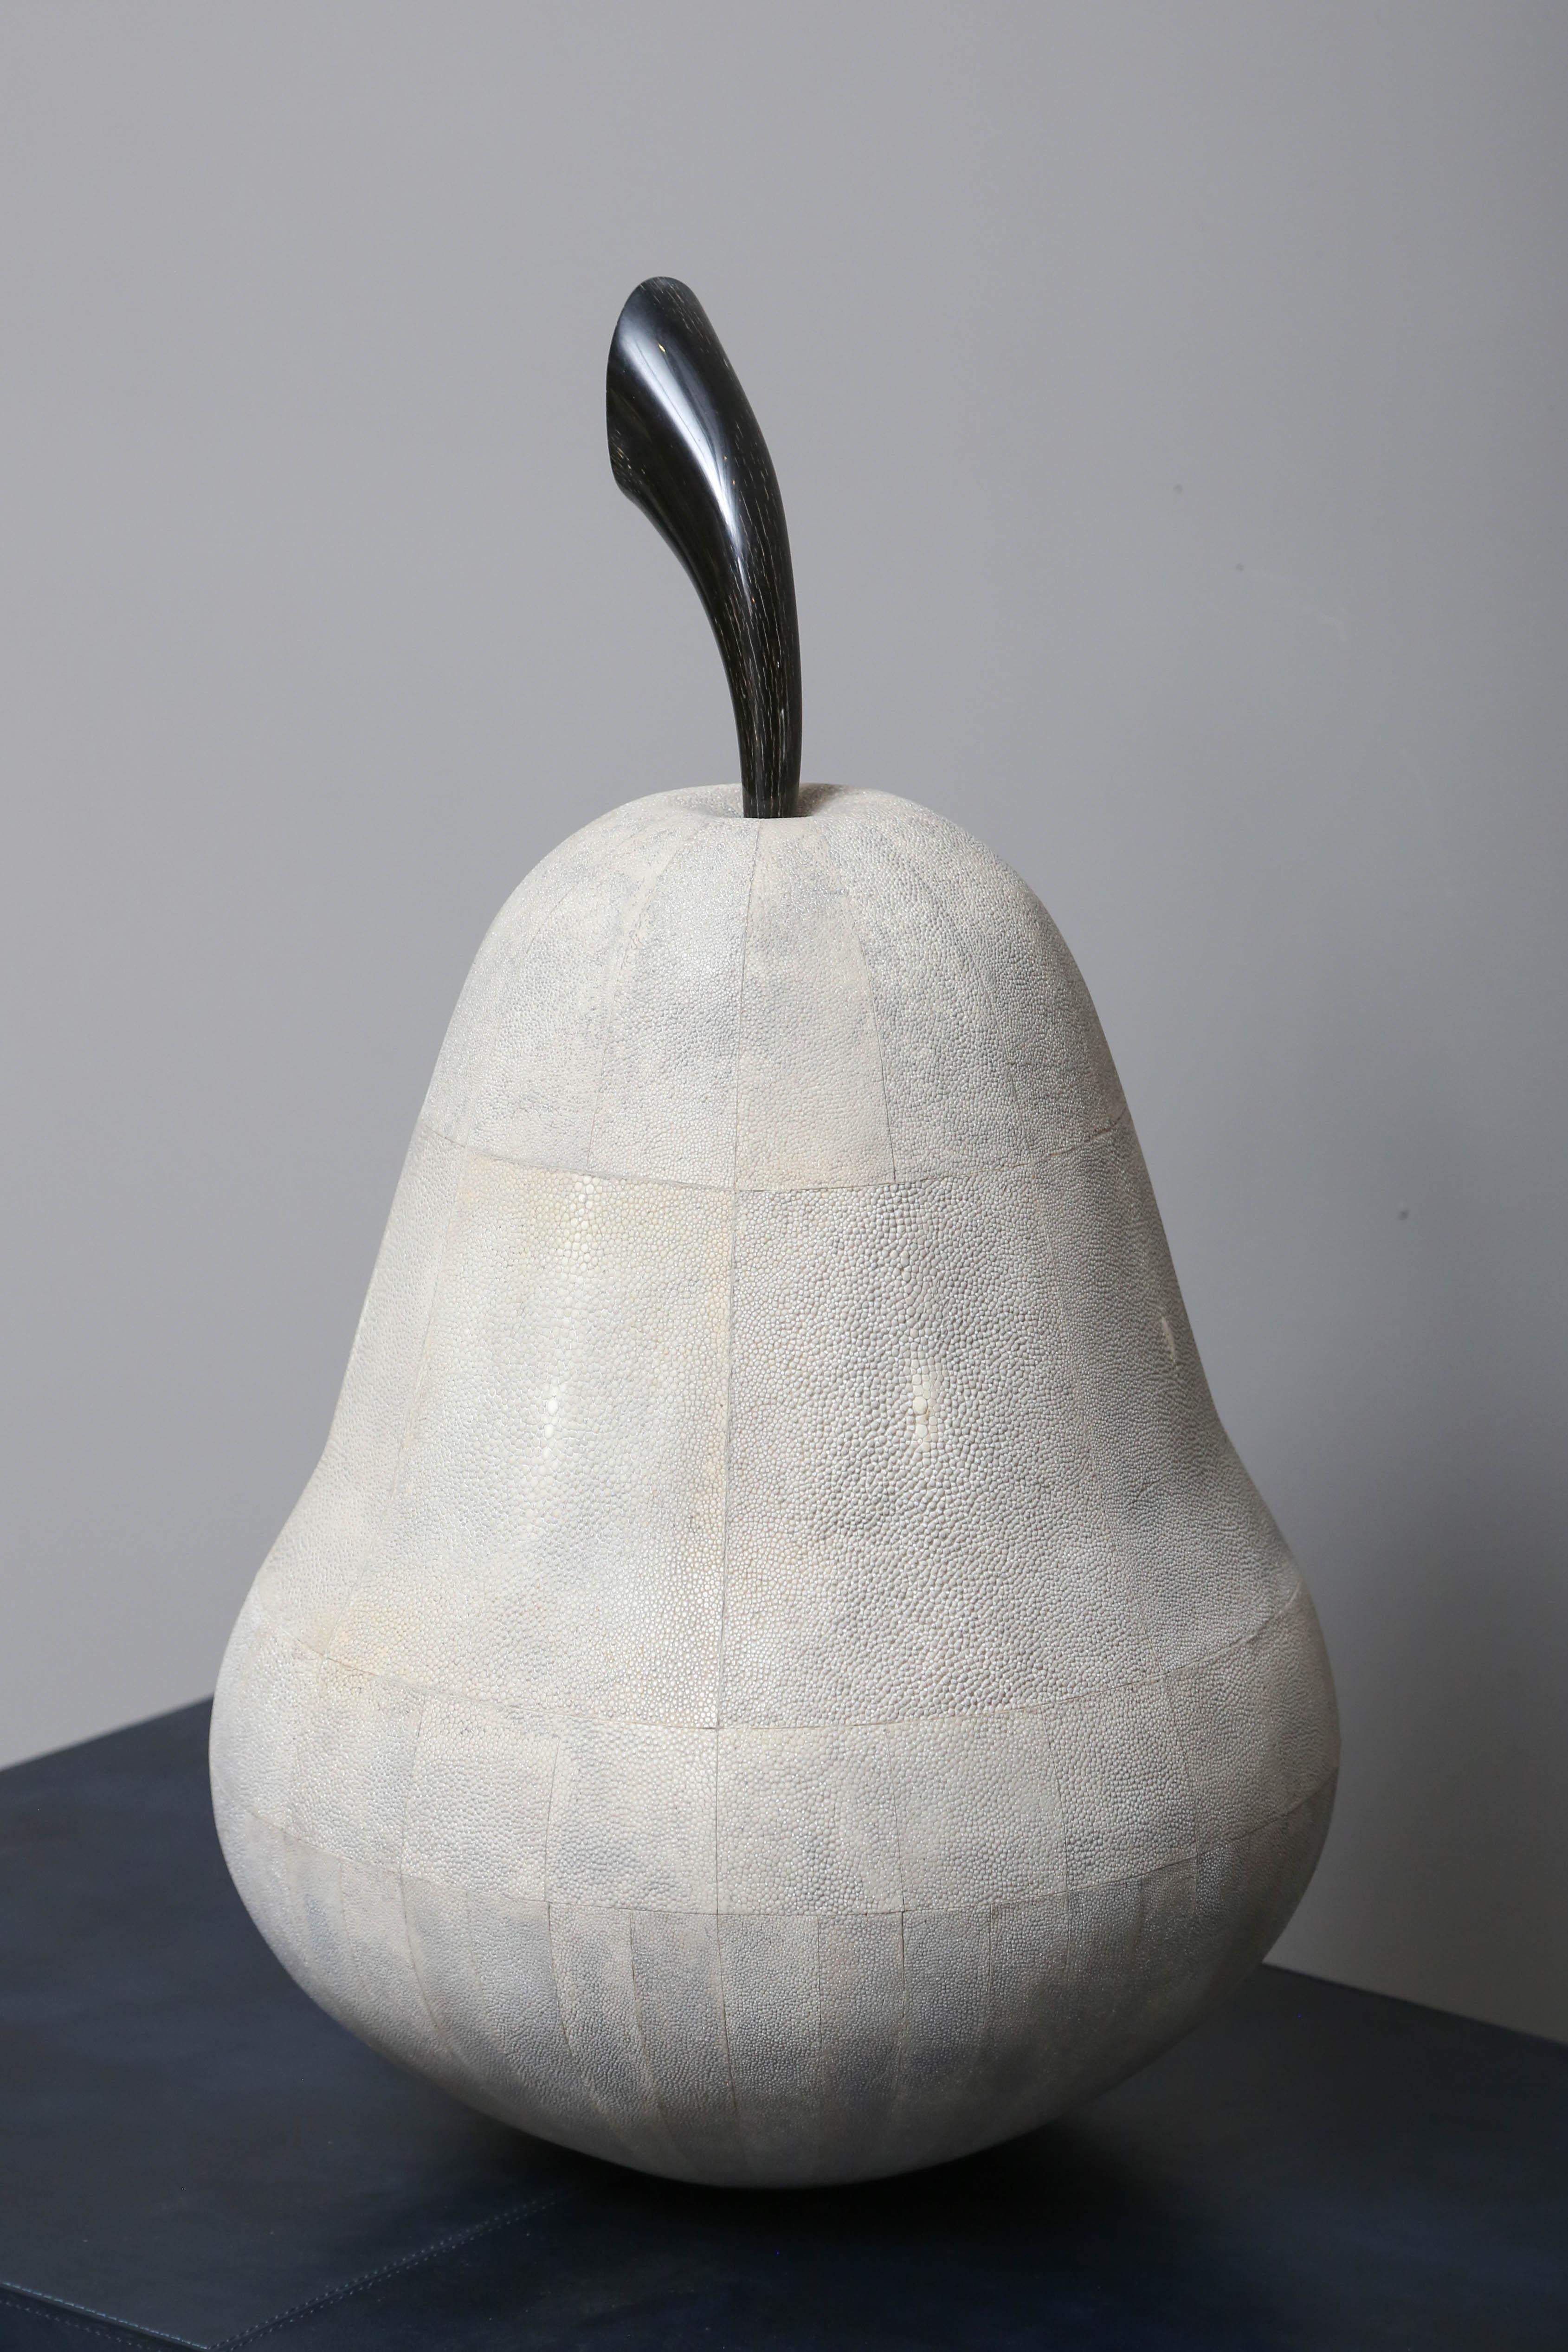 Monumental fiberglass pear covered with natural Shagreen and adorned with a natural horn stamp. Made in France and designed by Serge de Troyer.